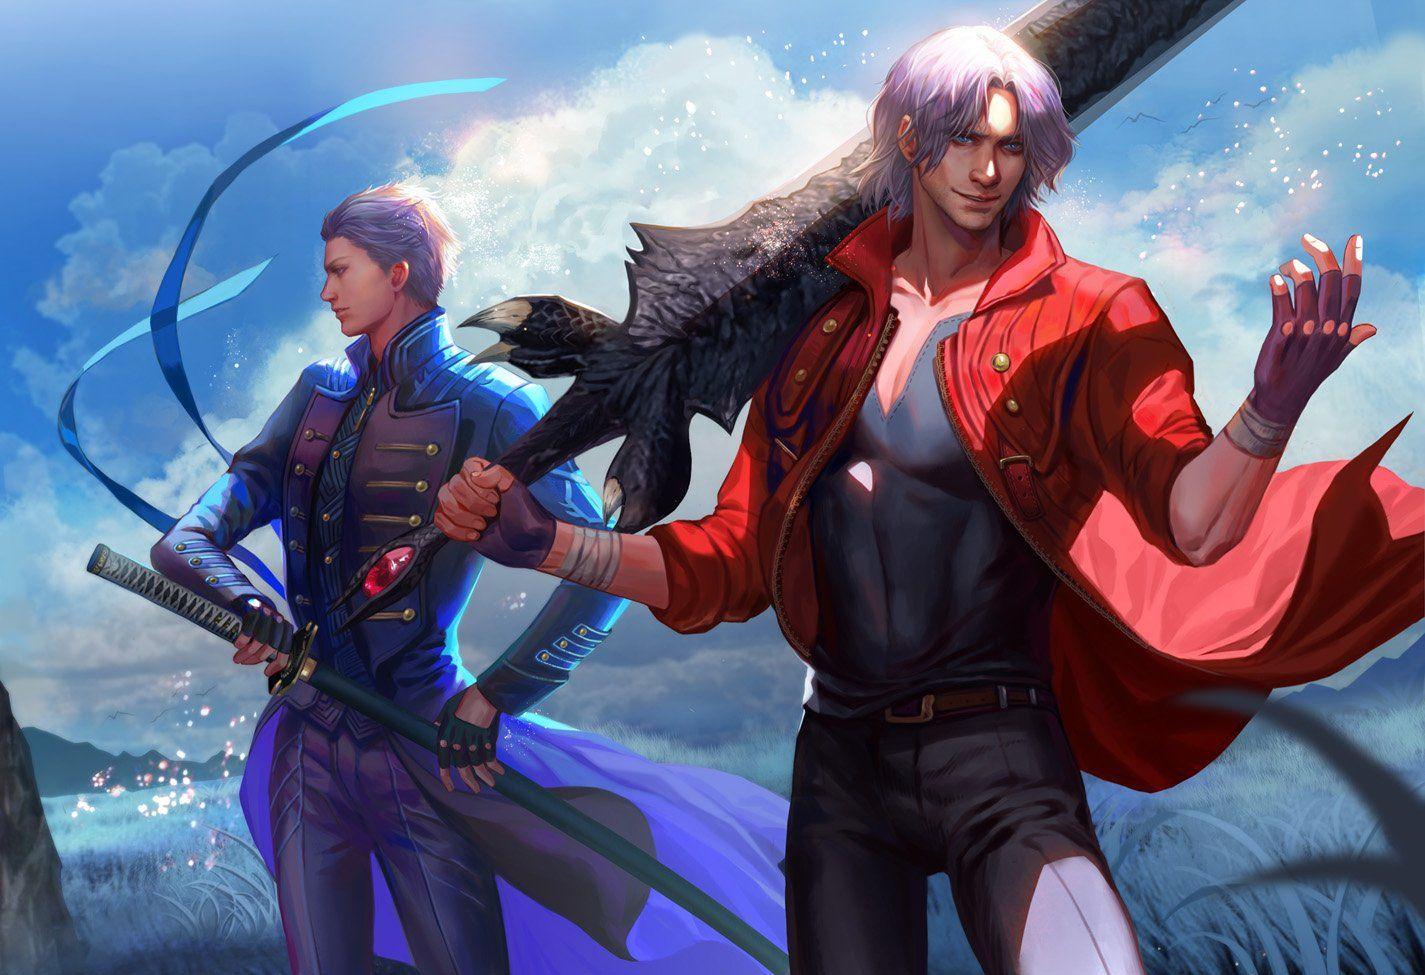 A New Devil May Cry Anime is Coming to Netflix